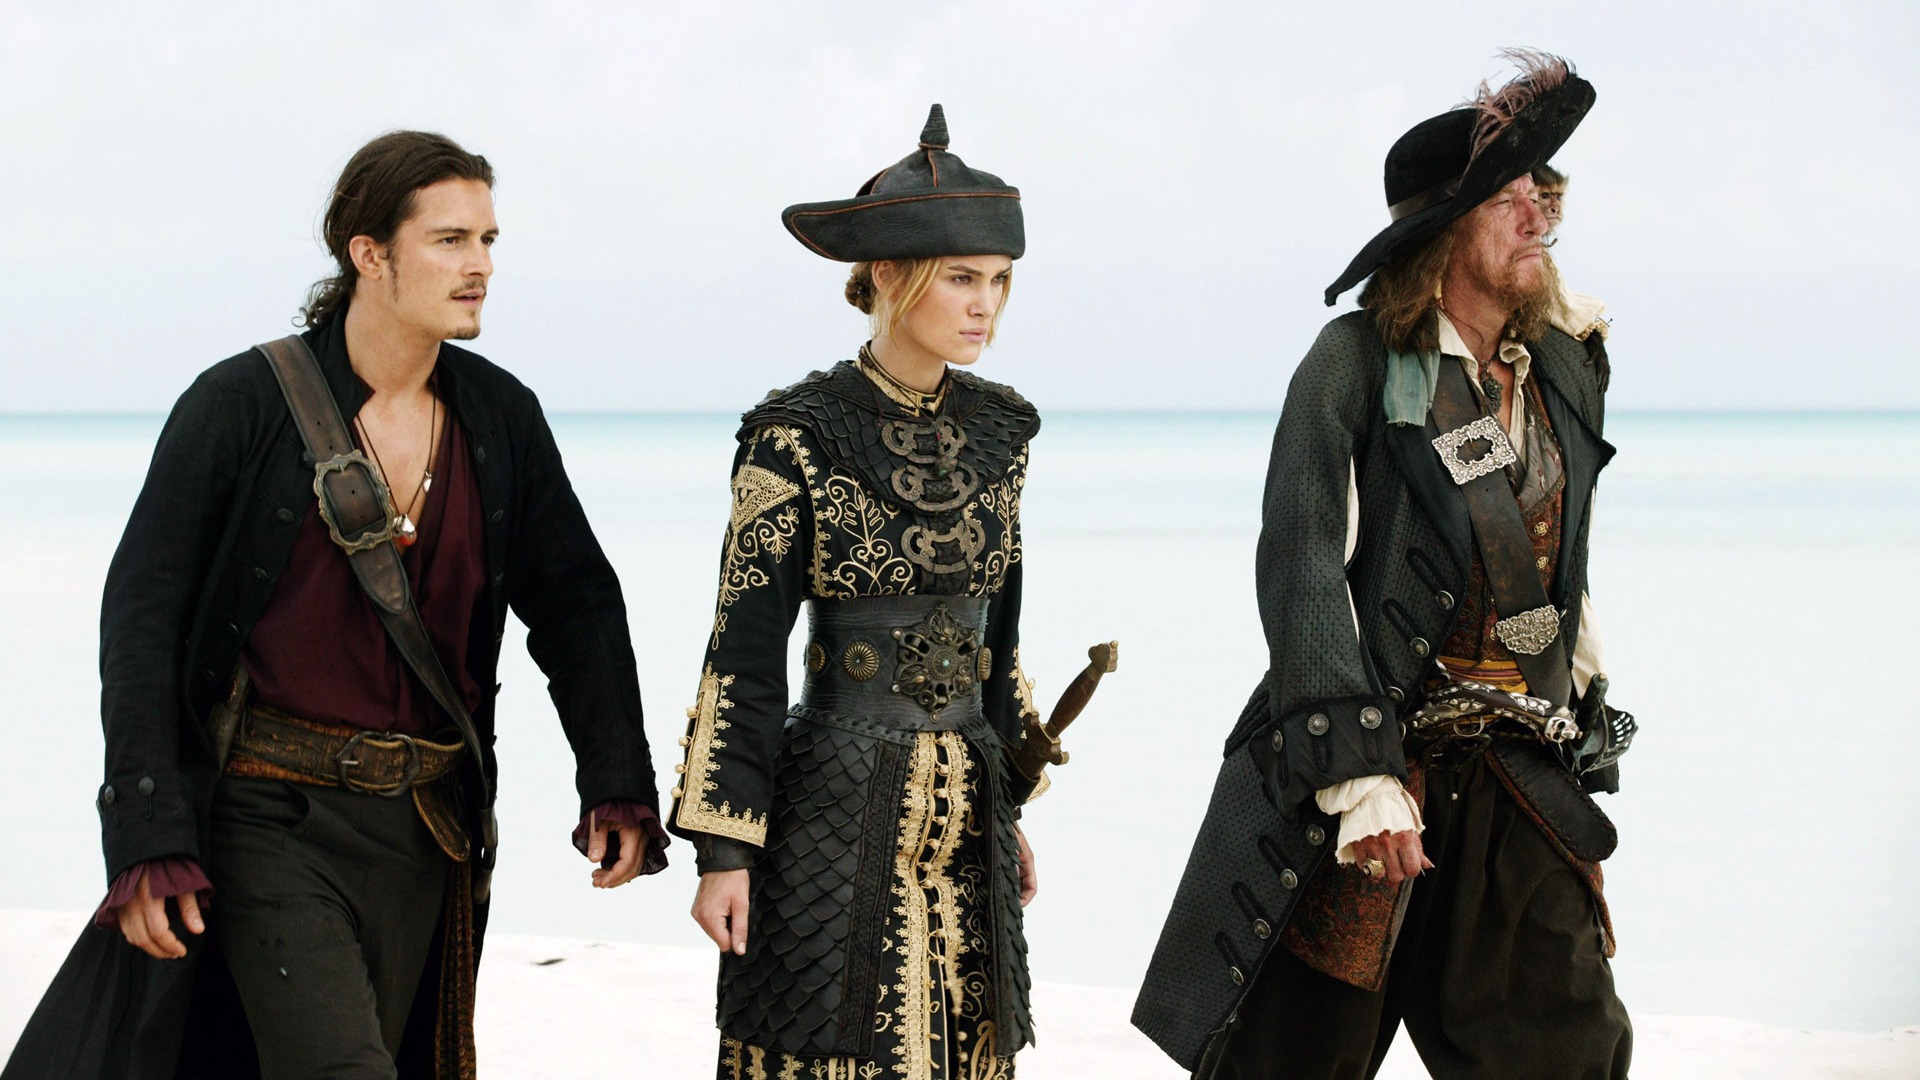 Pirates of the Caribbean 3 HD Wallpapers #14 - 1920x1080